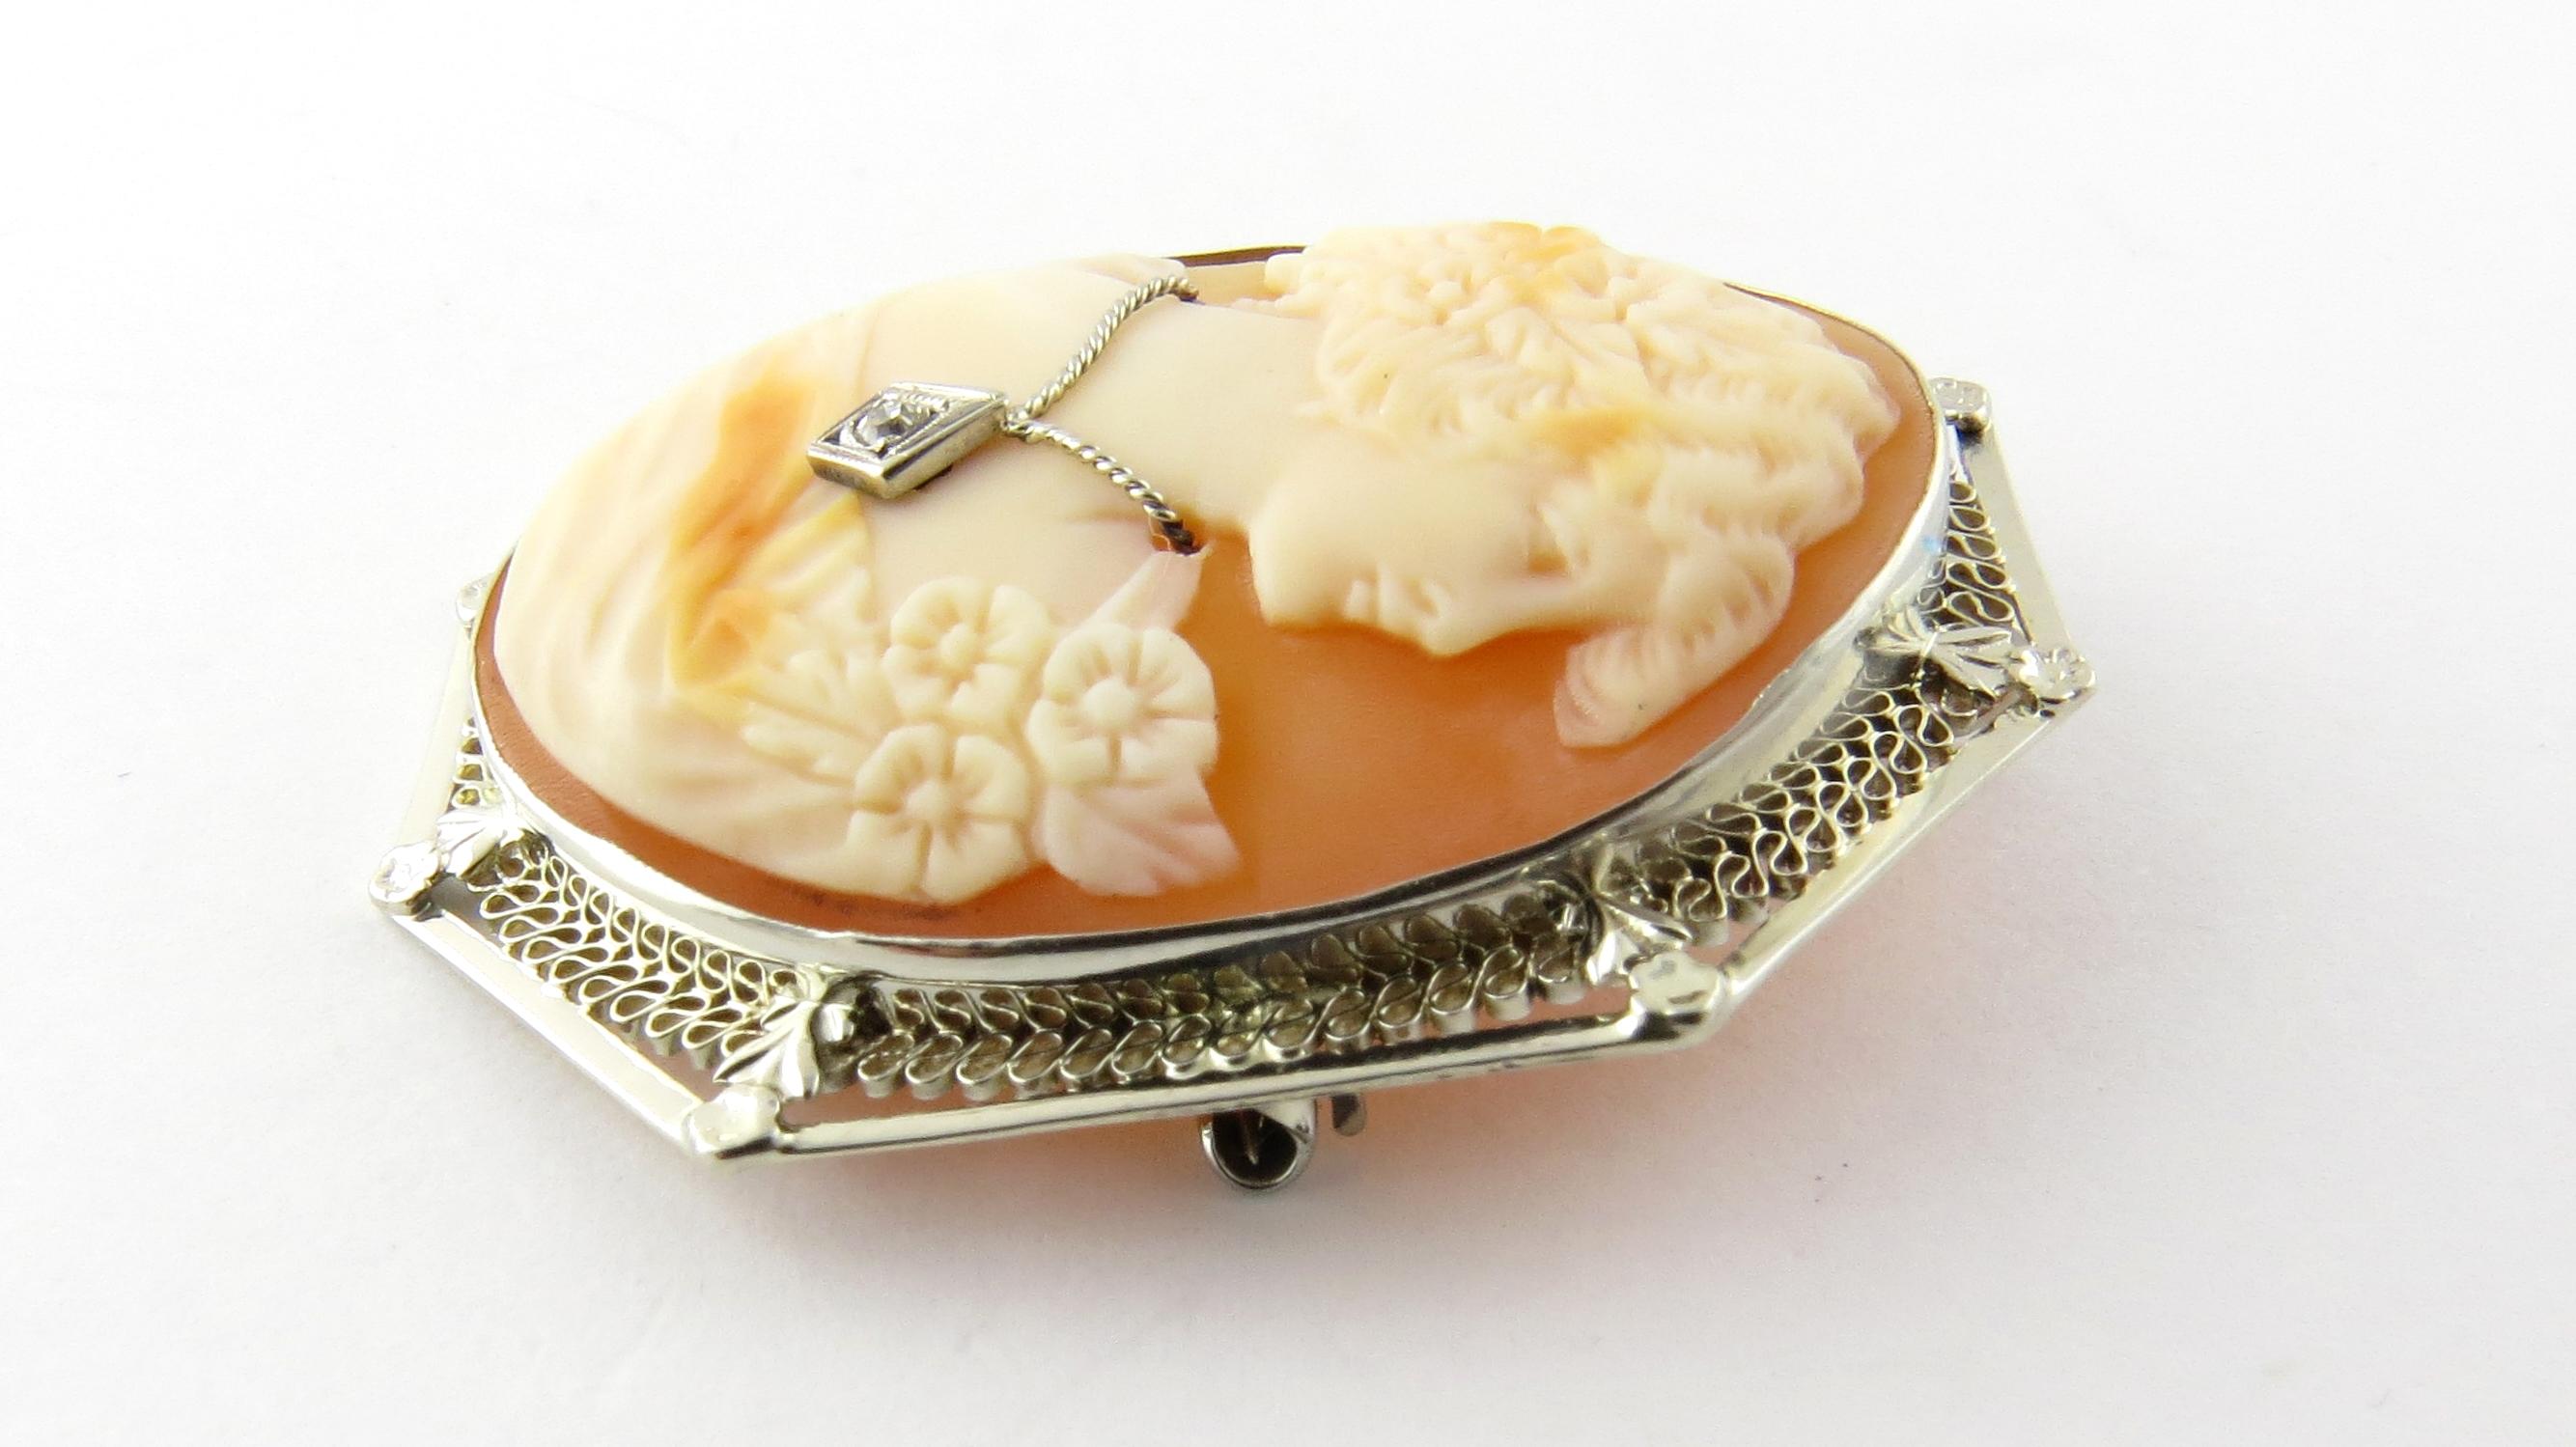 10 Karat White Gold and Diamond Cameo Pendant/Brooch-

This lovely cameo features a lovely lady in profile accented with one round old mine cut diamond and framed in delicate white gold filigree.  Can be worn as a brooch or a pendant.

Approximate